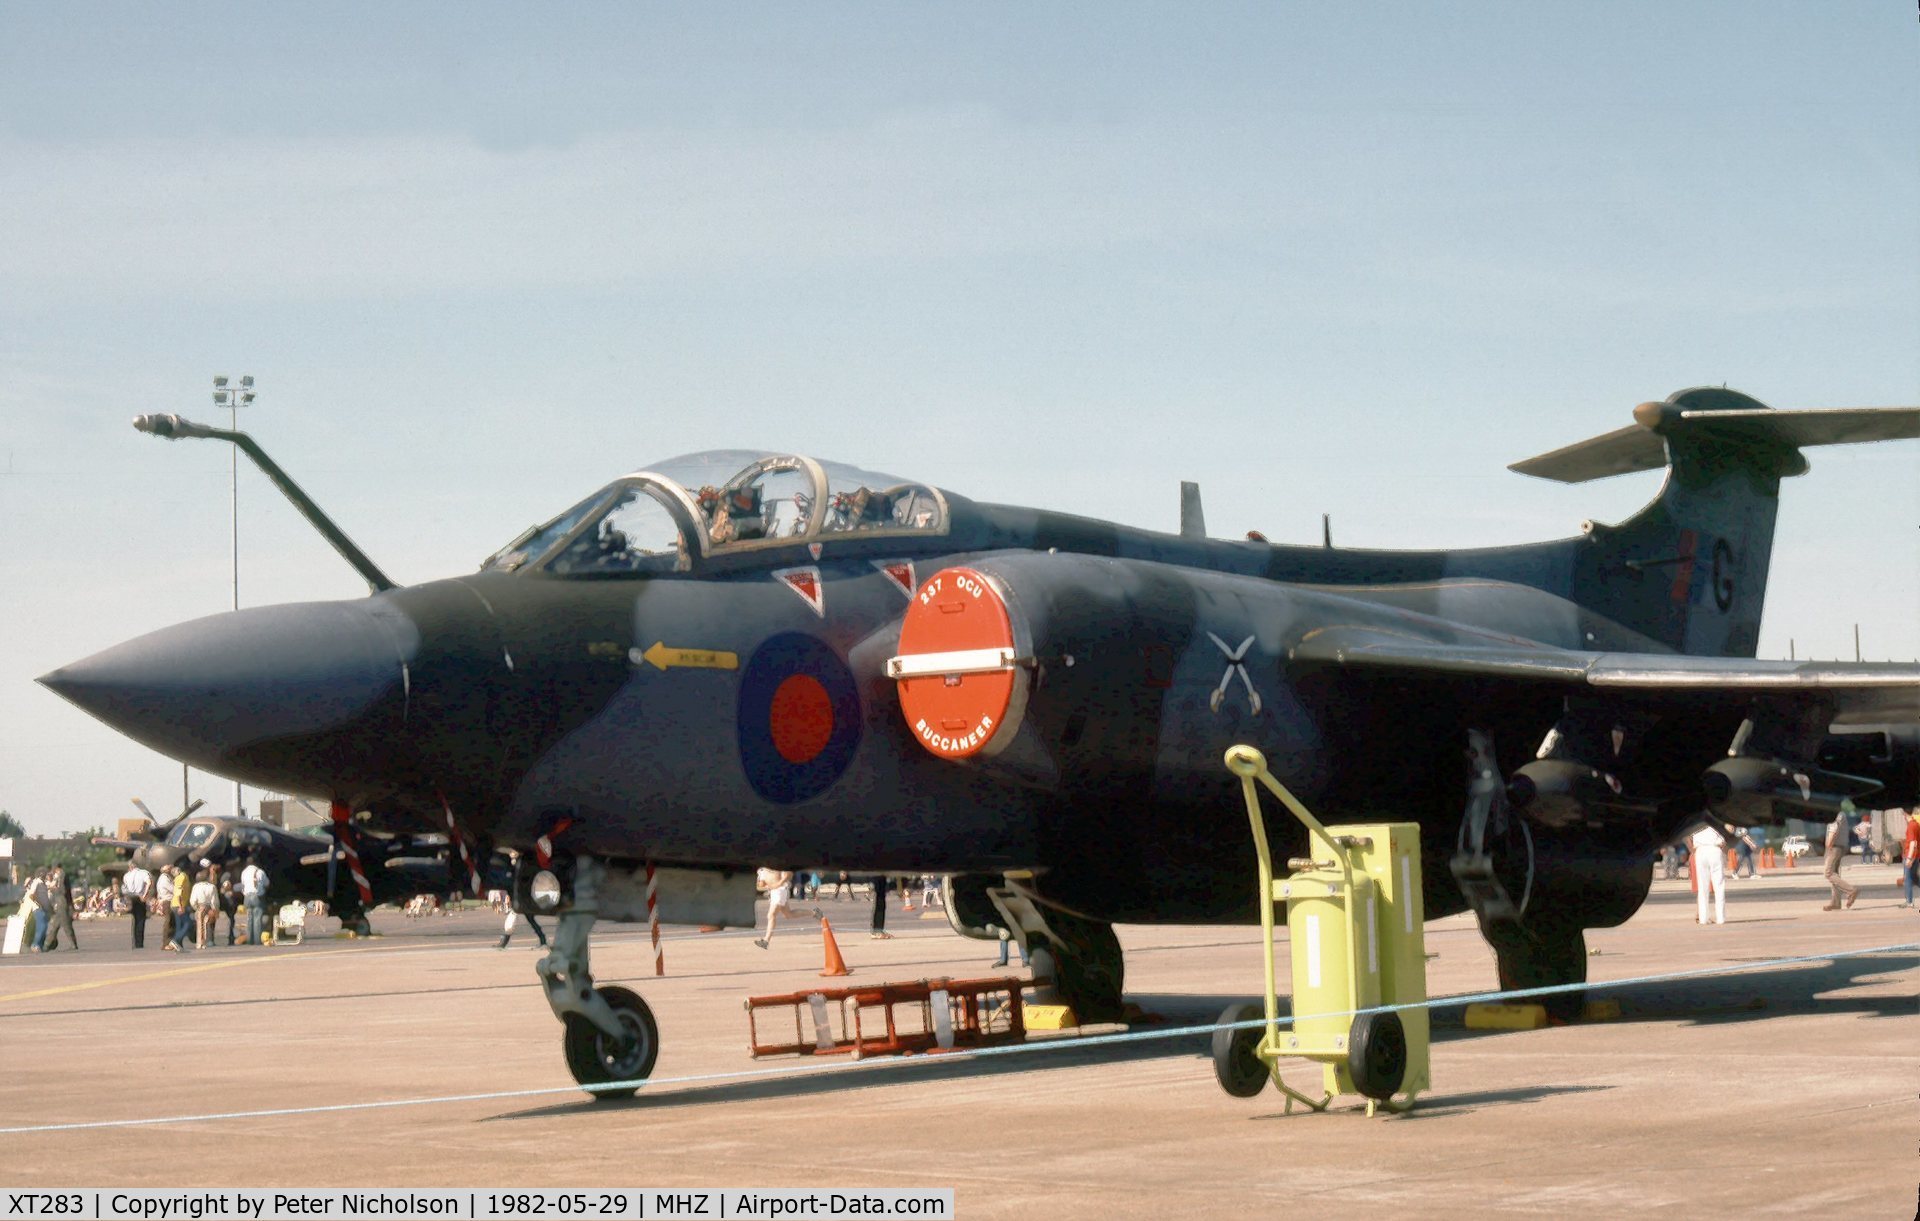 XT283, 1965 Hawker Siddeley Buccaneer S.2A C/N B3-05-65, Buccaneer S.2A of RAF Lossiemouth's 237 Operational Conversion Unit on display at the 1982 RAF Mildenhall Air Fete.